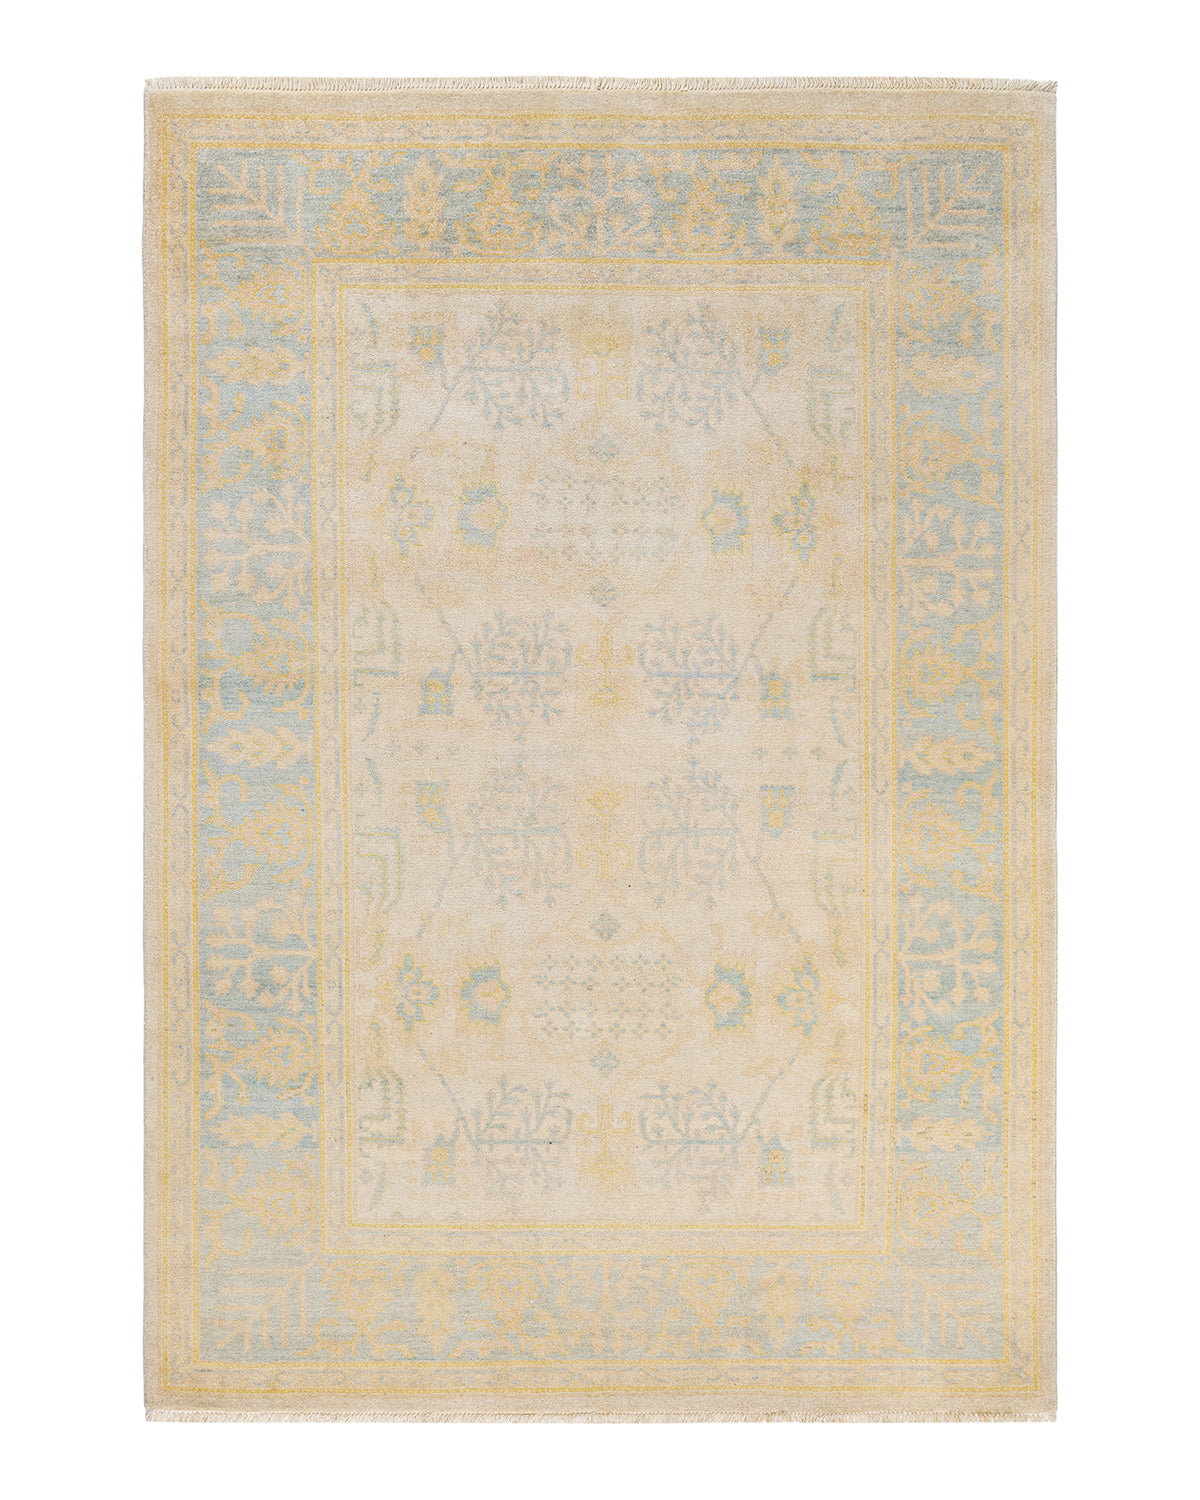 Eclectic, One-of-a-Kind Hand-Knotted Area Rug  - Ivory, 6' 3" x 9' 1"